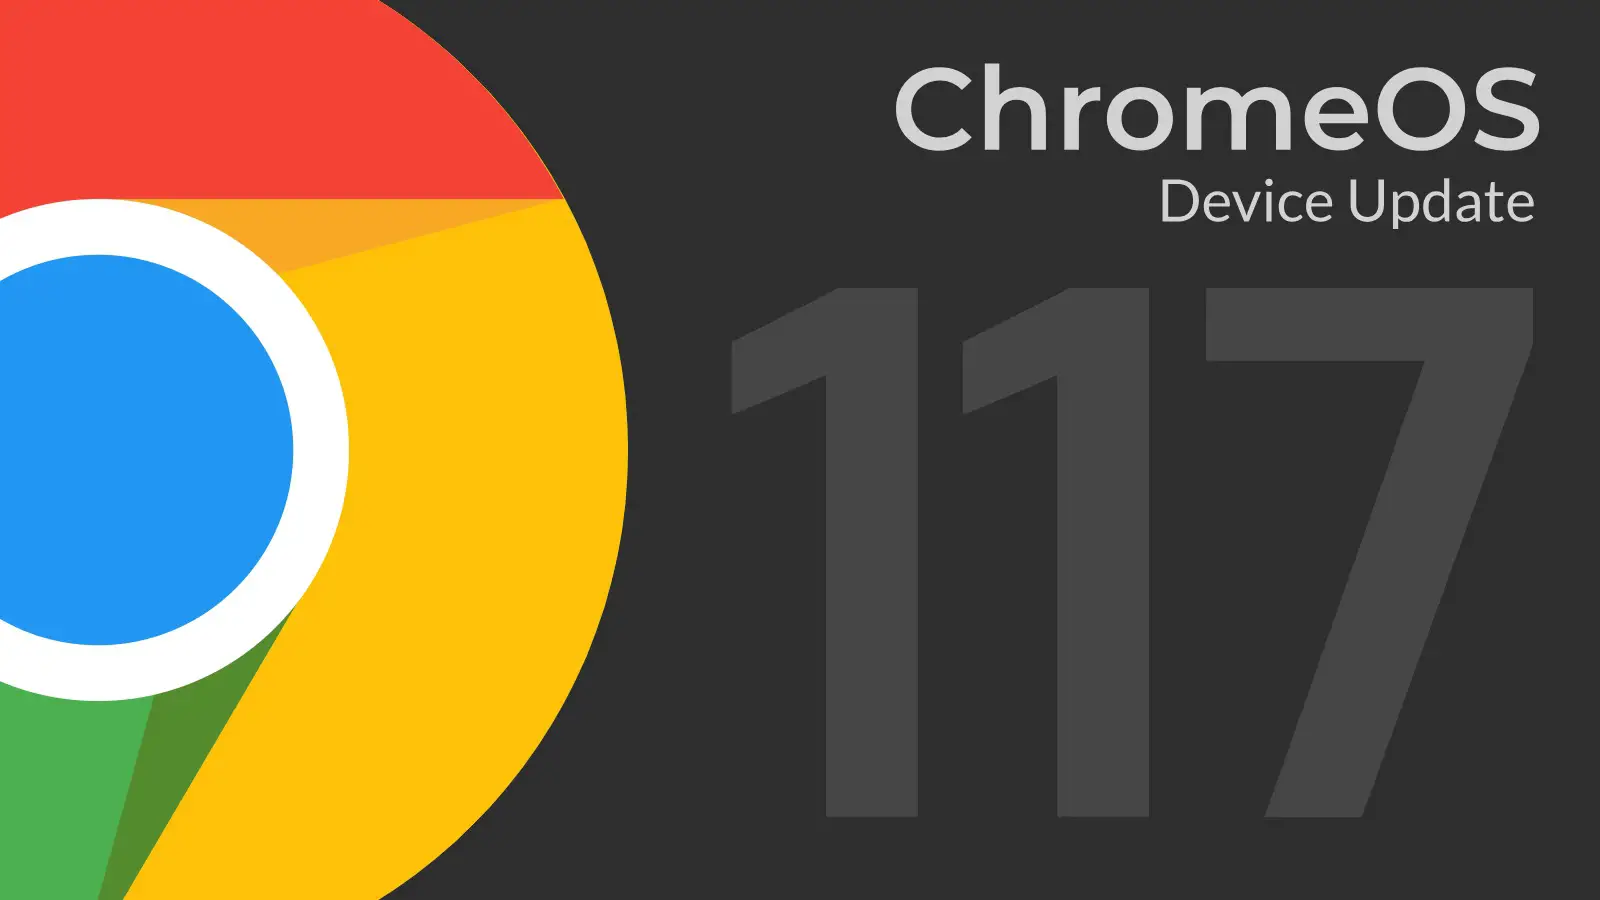 ChromeOS 117 Update Introduces Material You Design And Window Organizer